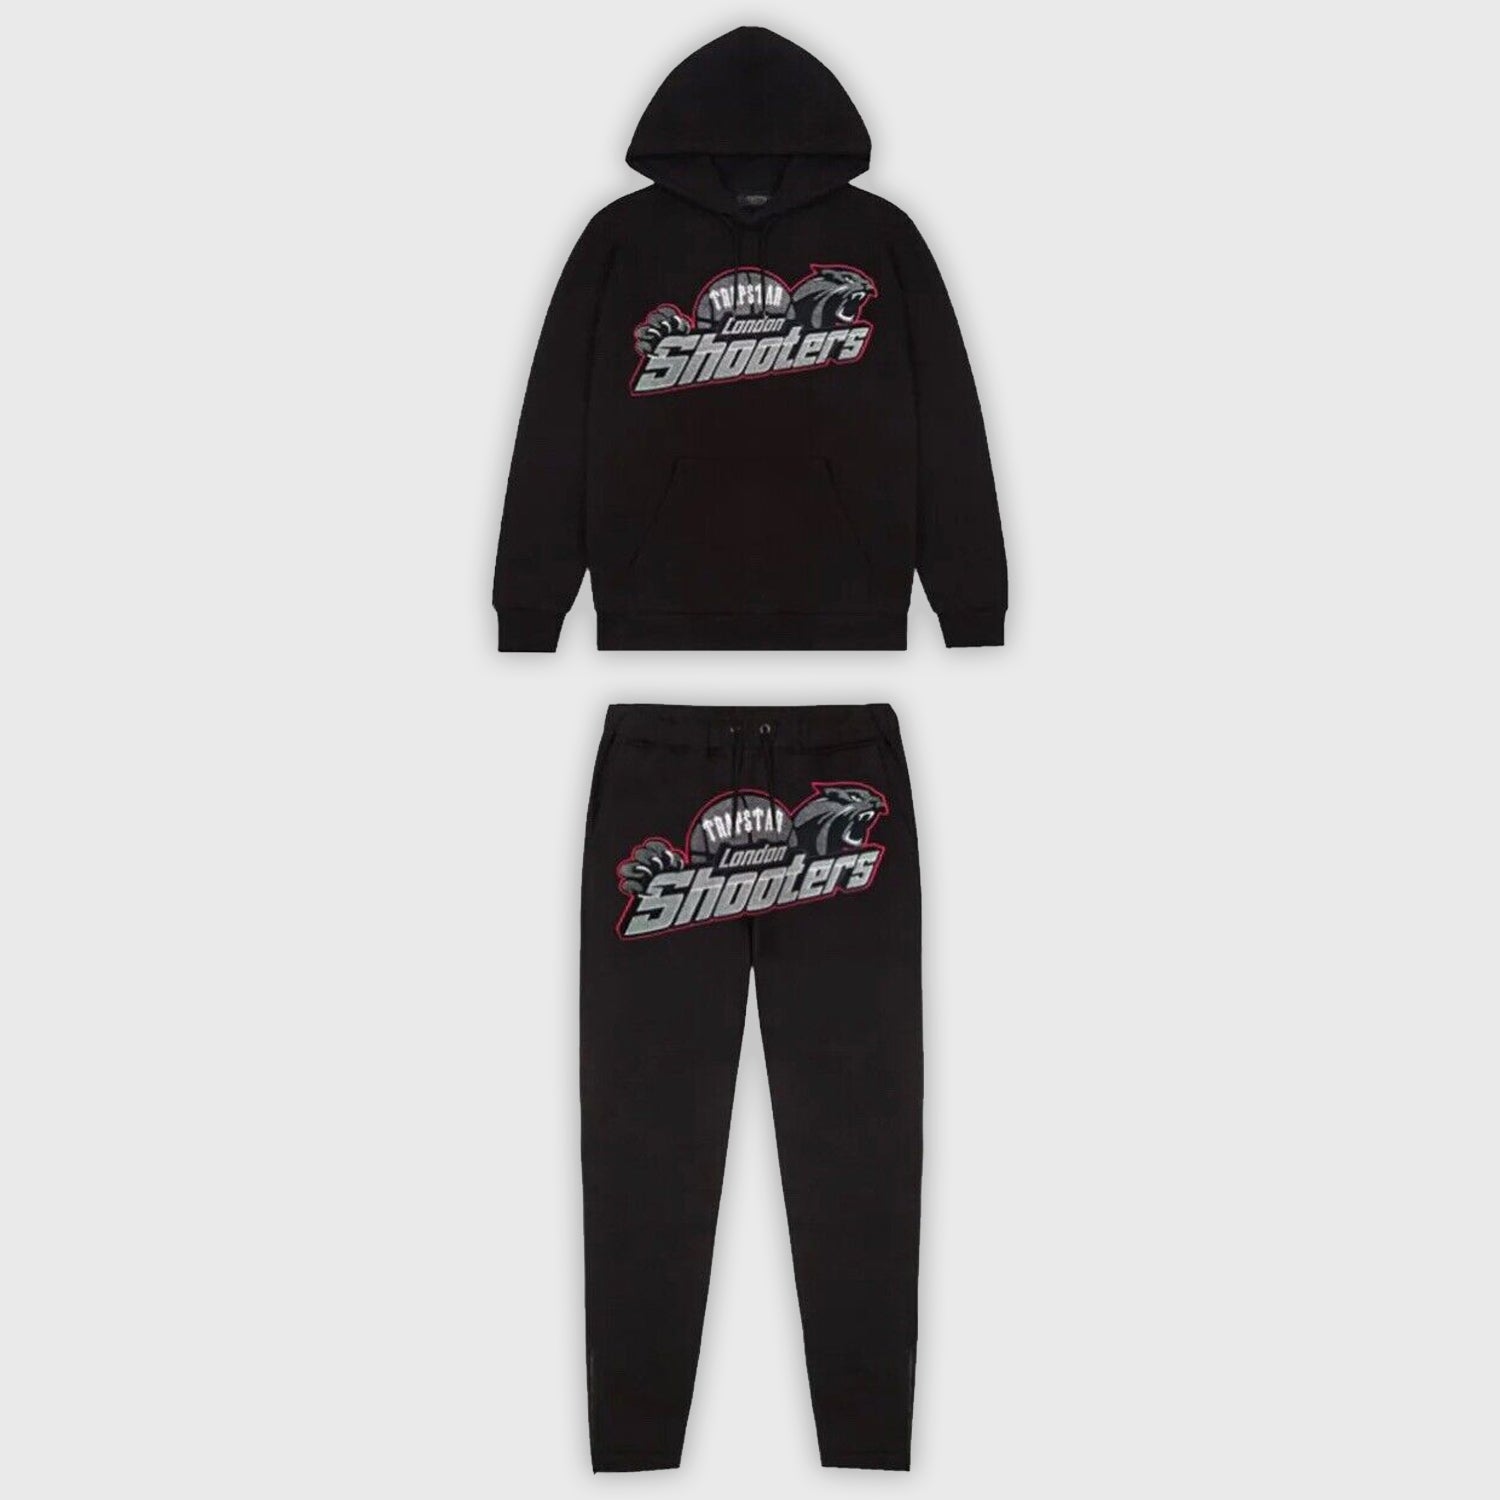 TRAPSTAR SHOOTERS HOODED TRACKSUIT - BLACK / RED KICKKONNECT